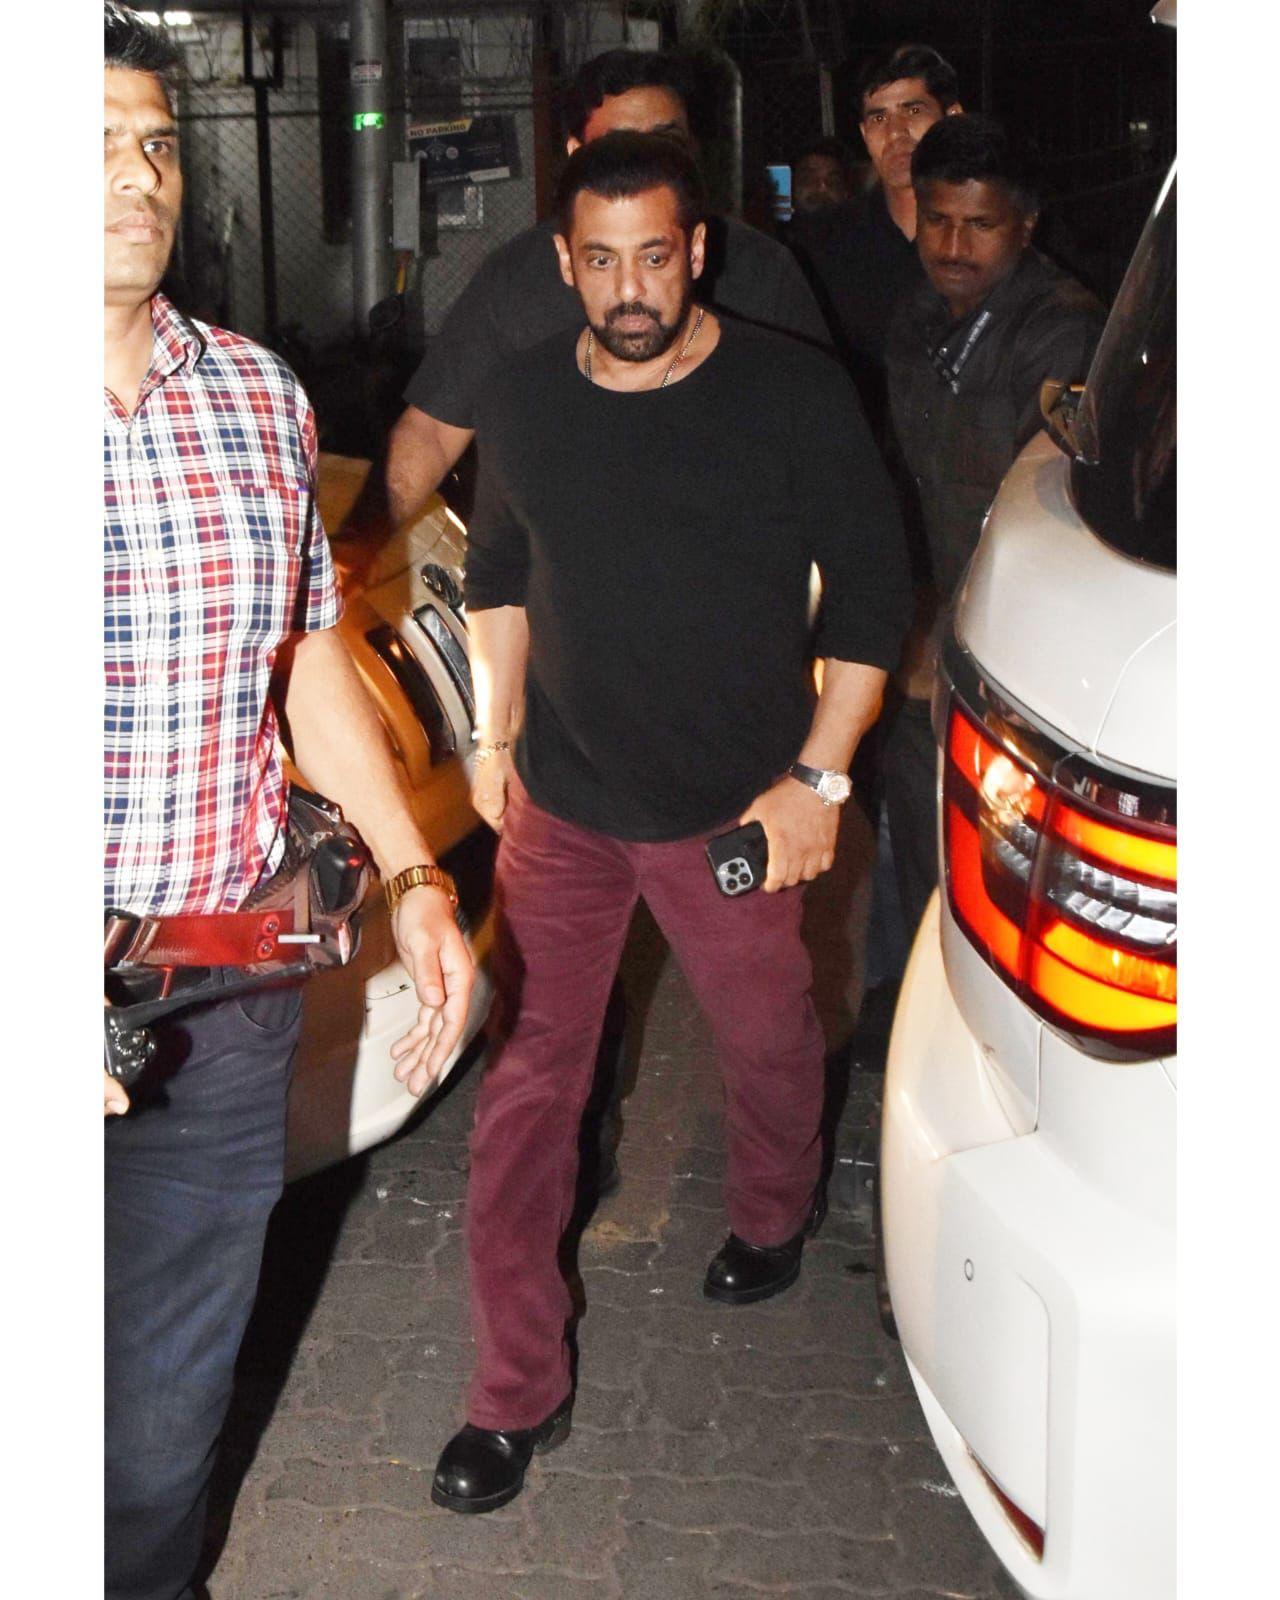 The actor was dressed in purple jeans which he paired with a black shirt